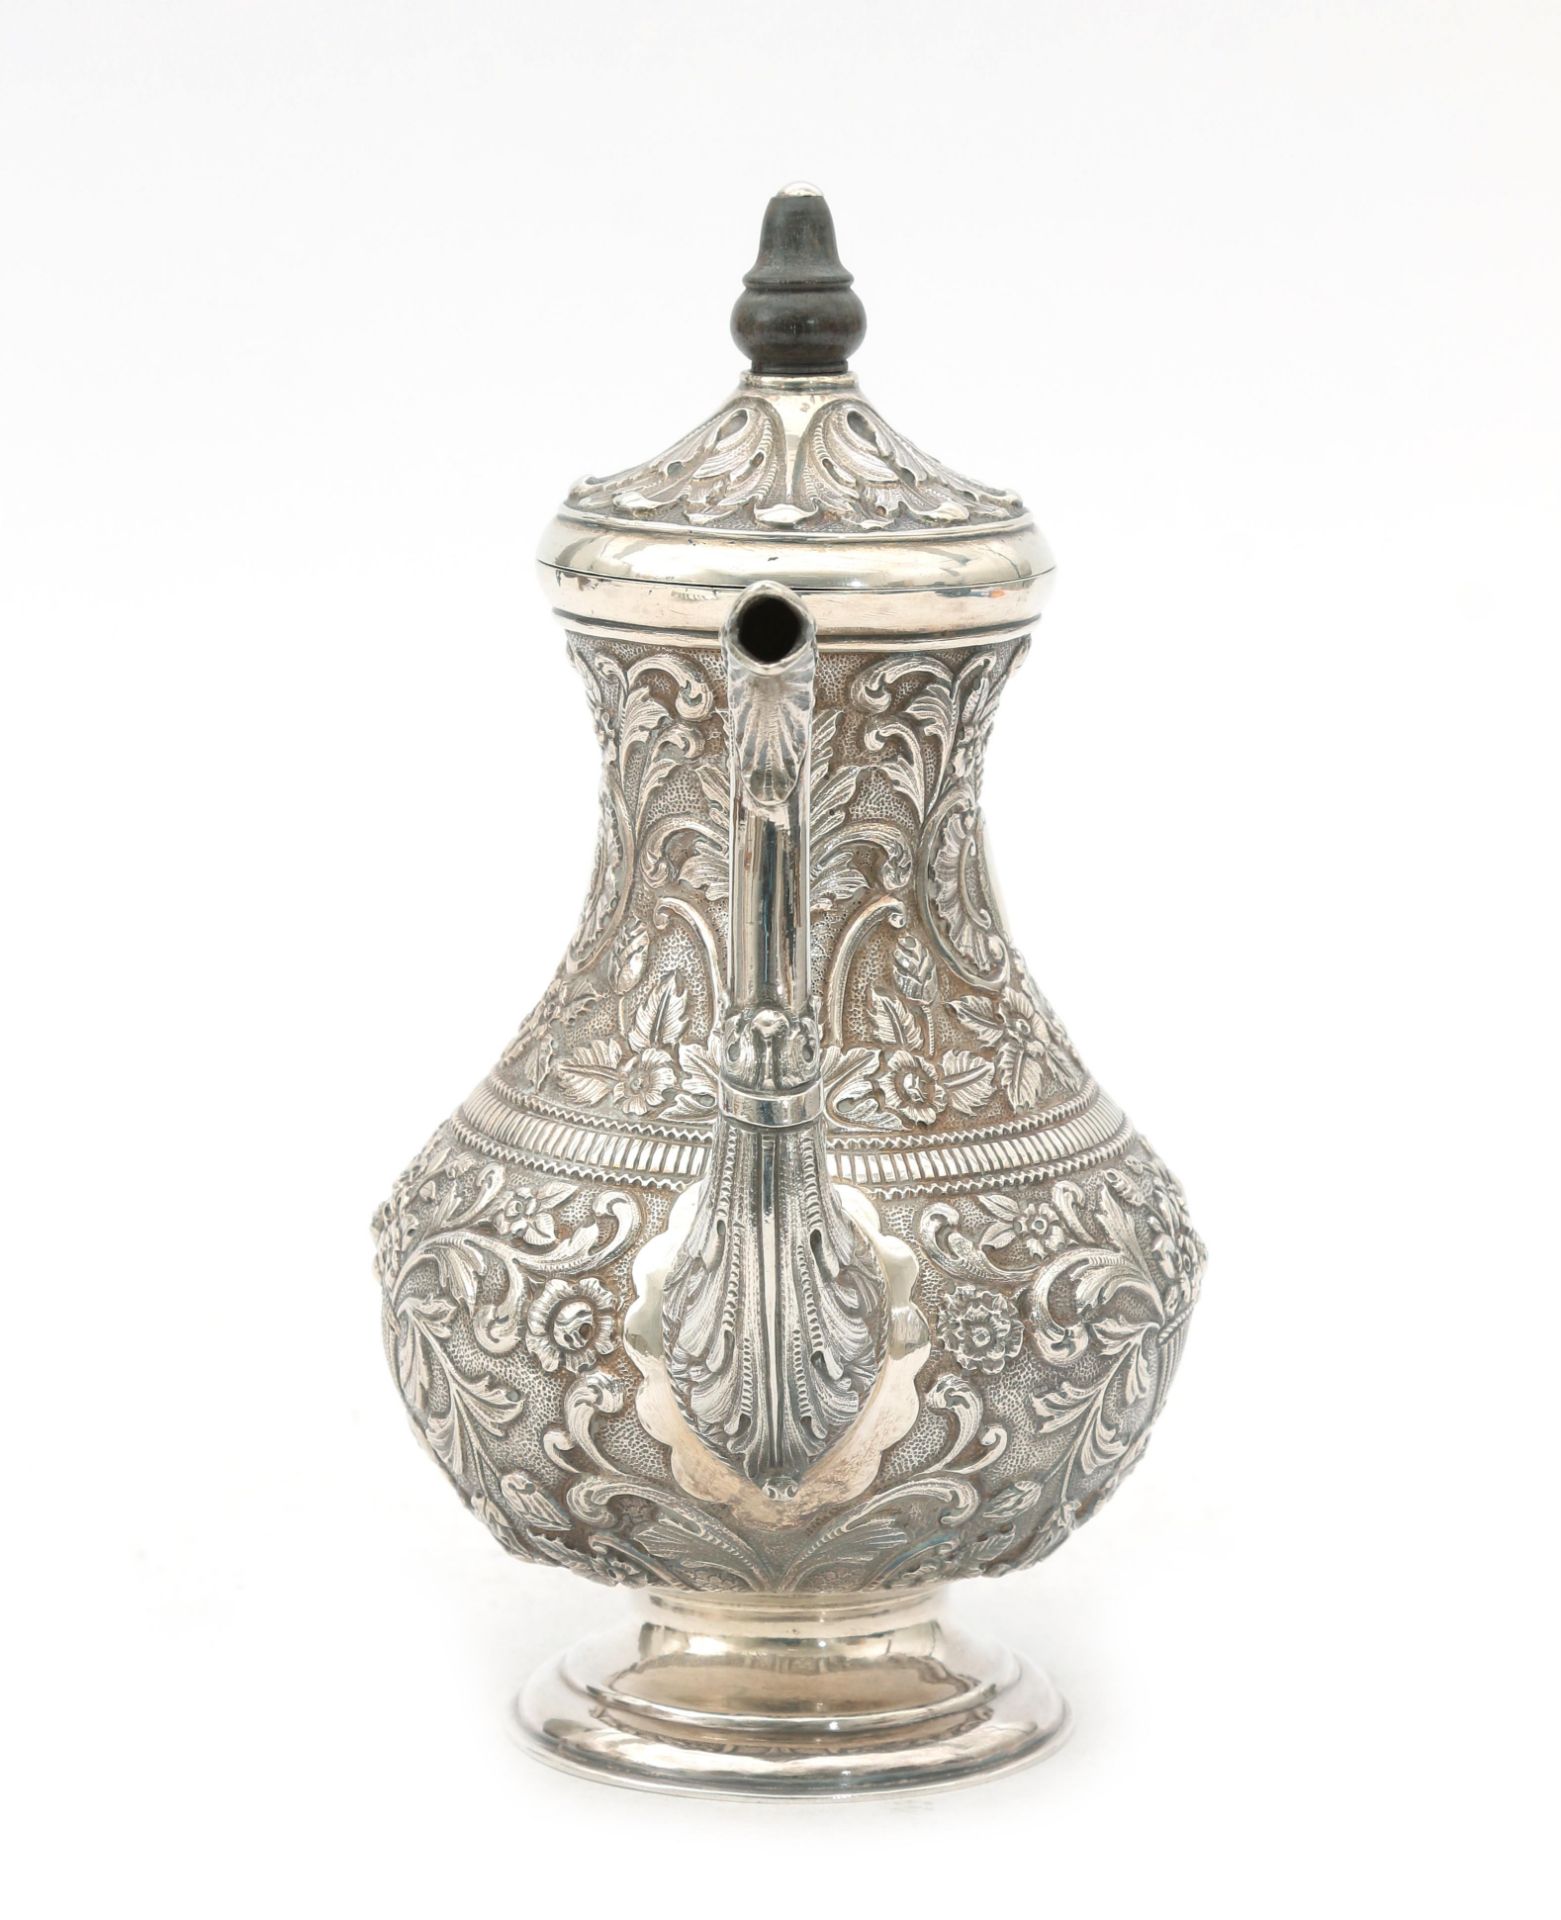 A richly decorated embossed Frisian silver mocha pot with foliate motifs and palisander finial. - Bild 2 aus 4